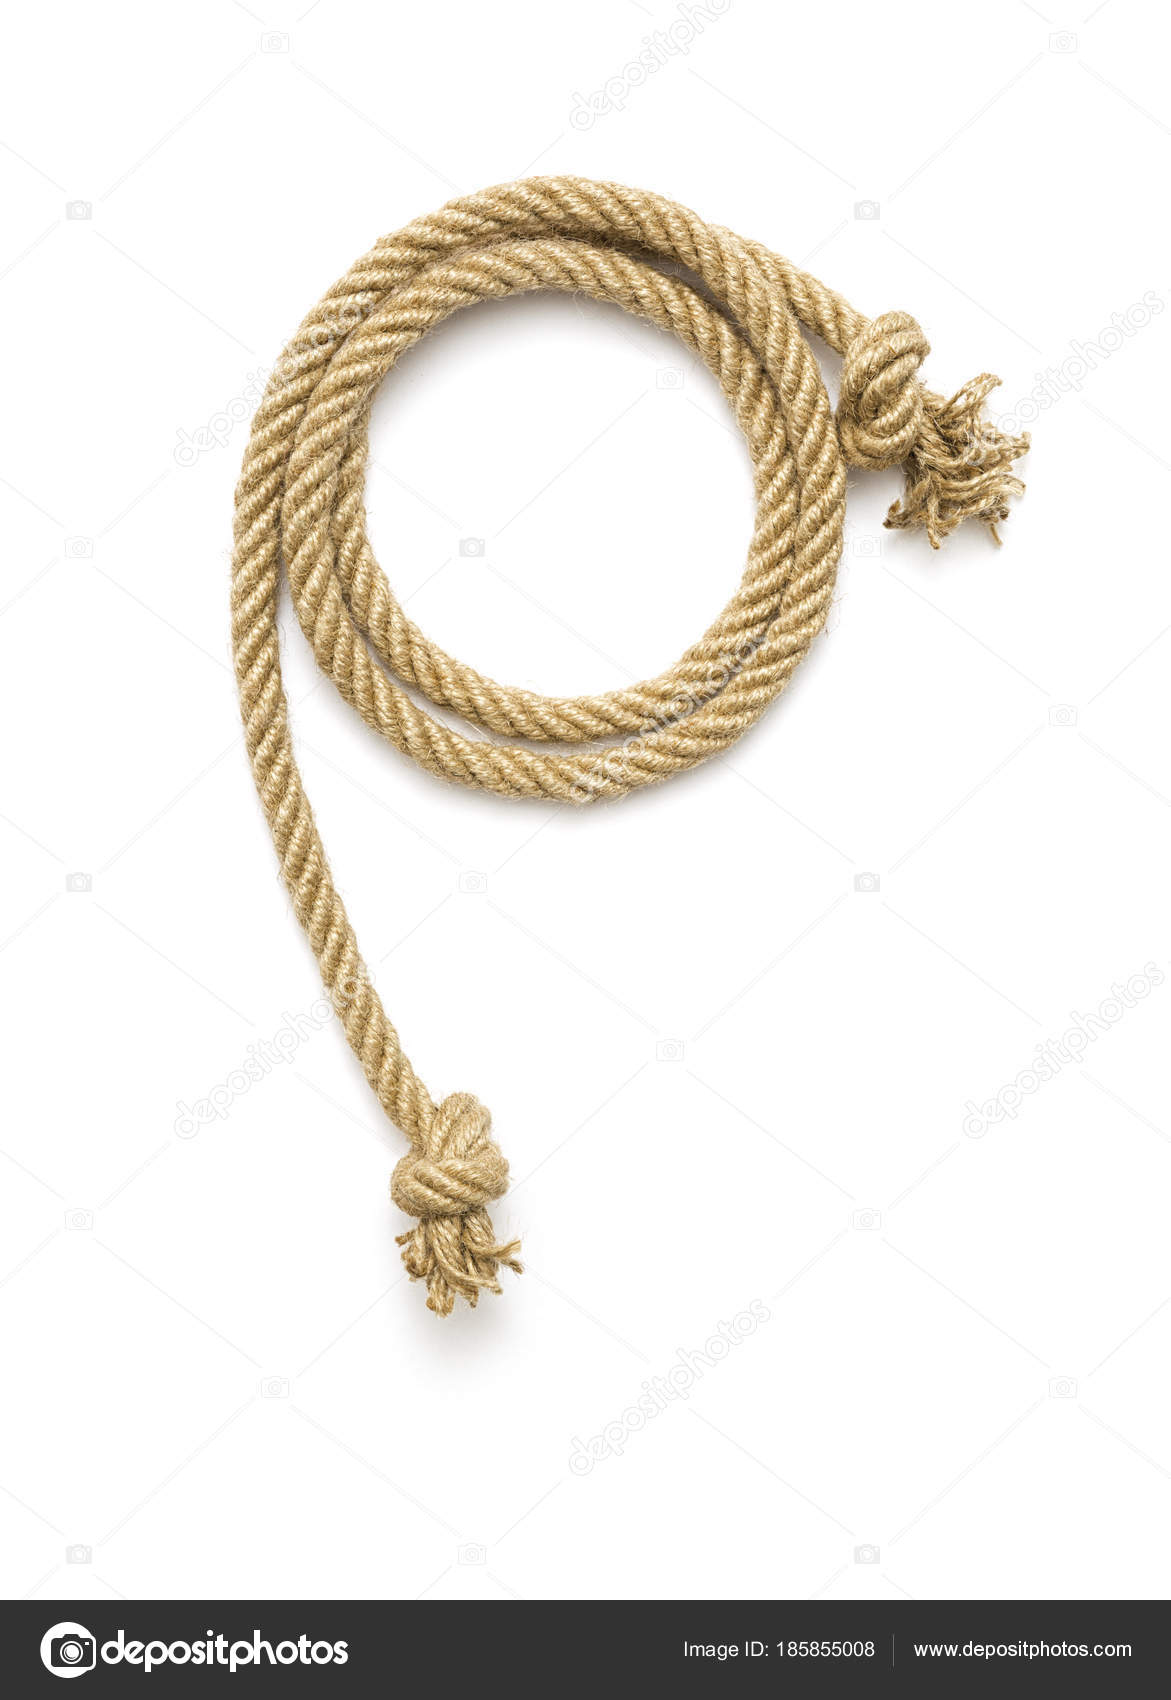 Ship rope tied with knot — Stock Photo © wabeno #185855008